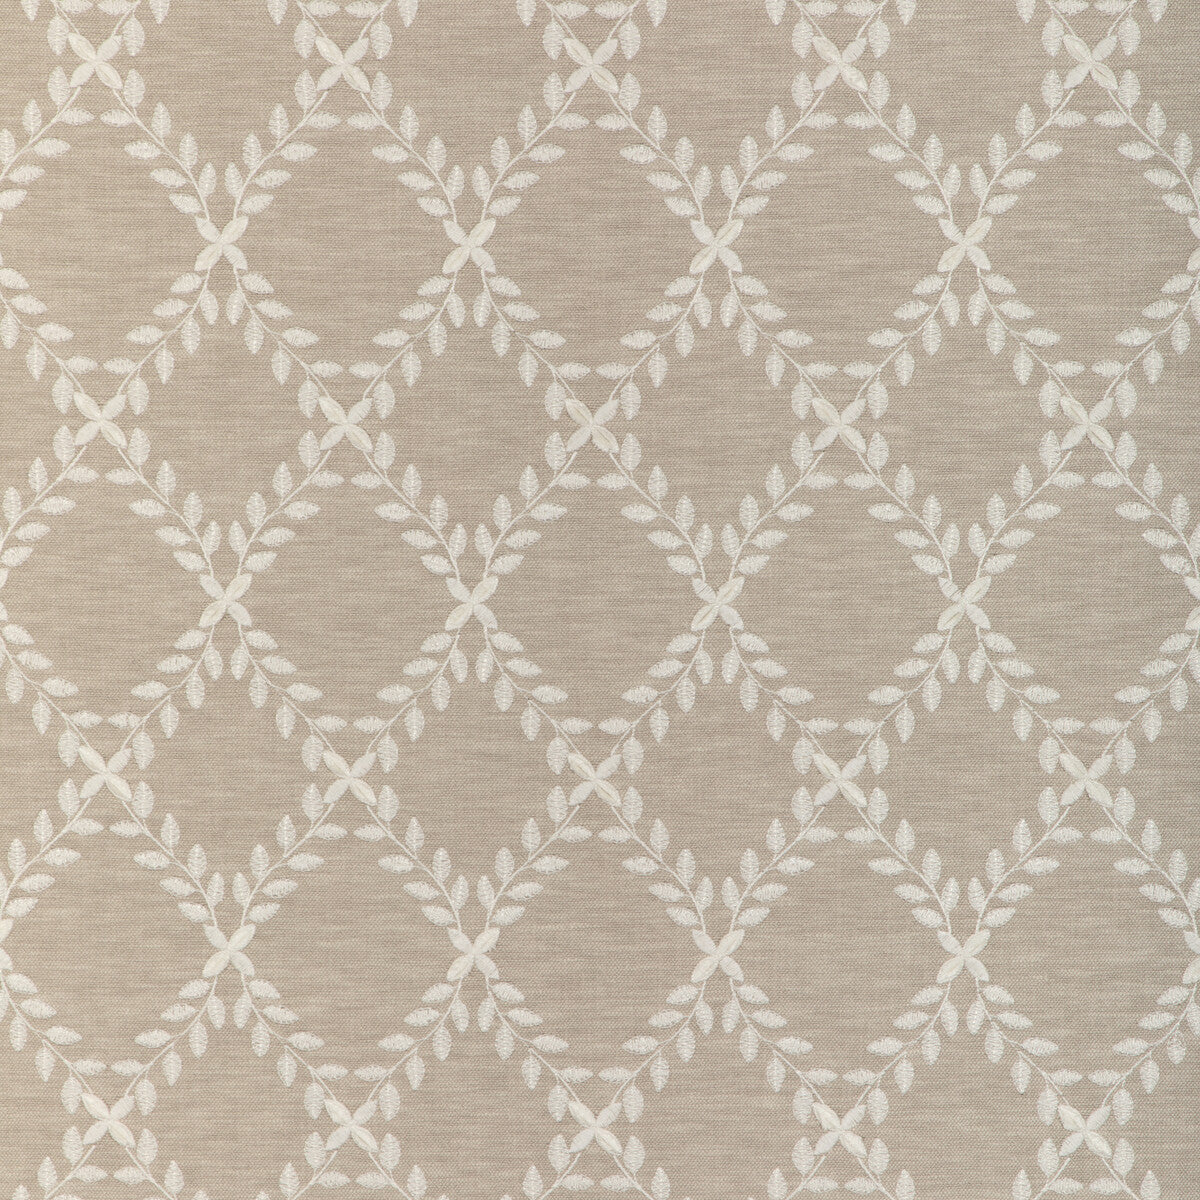 Kravet Basics fabric in 37090-16 color - pattern 37090.16.0 - by Kravet Basics in the Modern Embroideries III collection